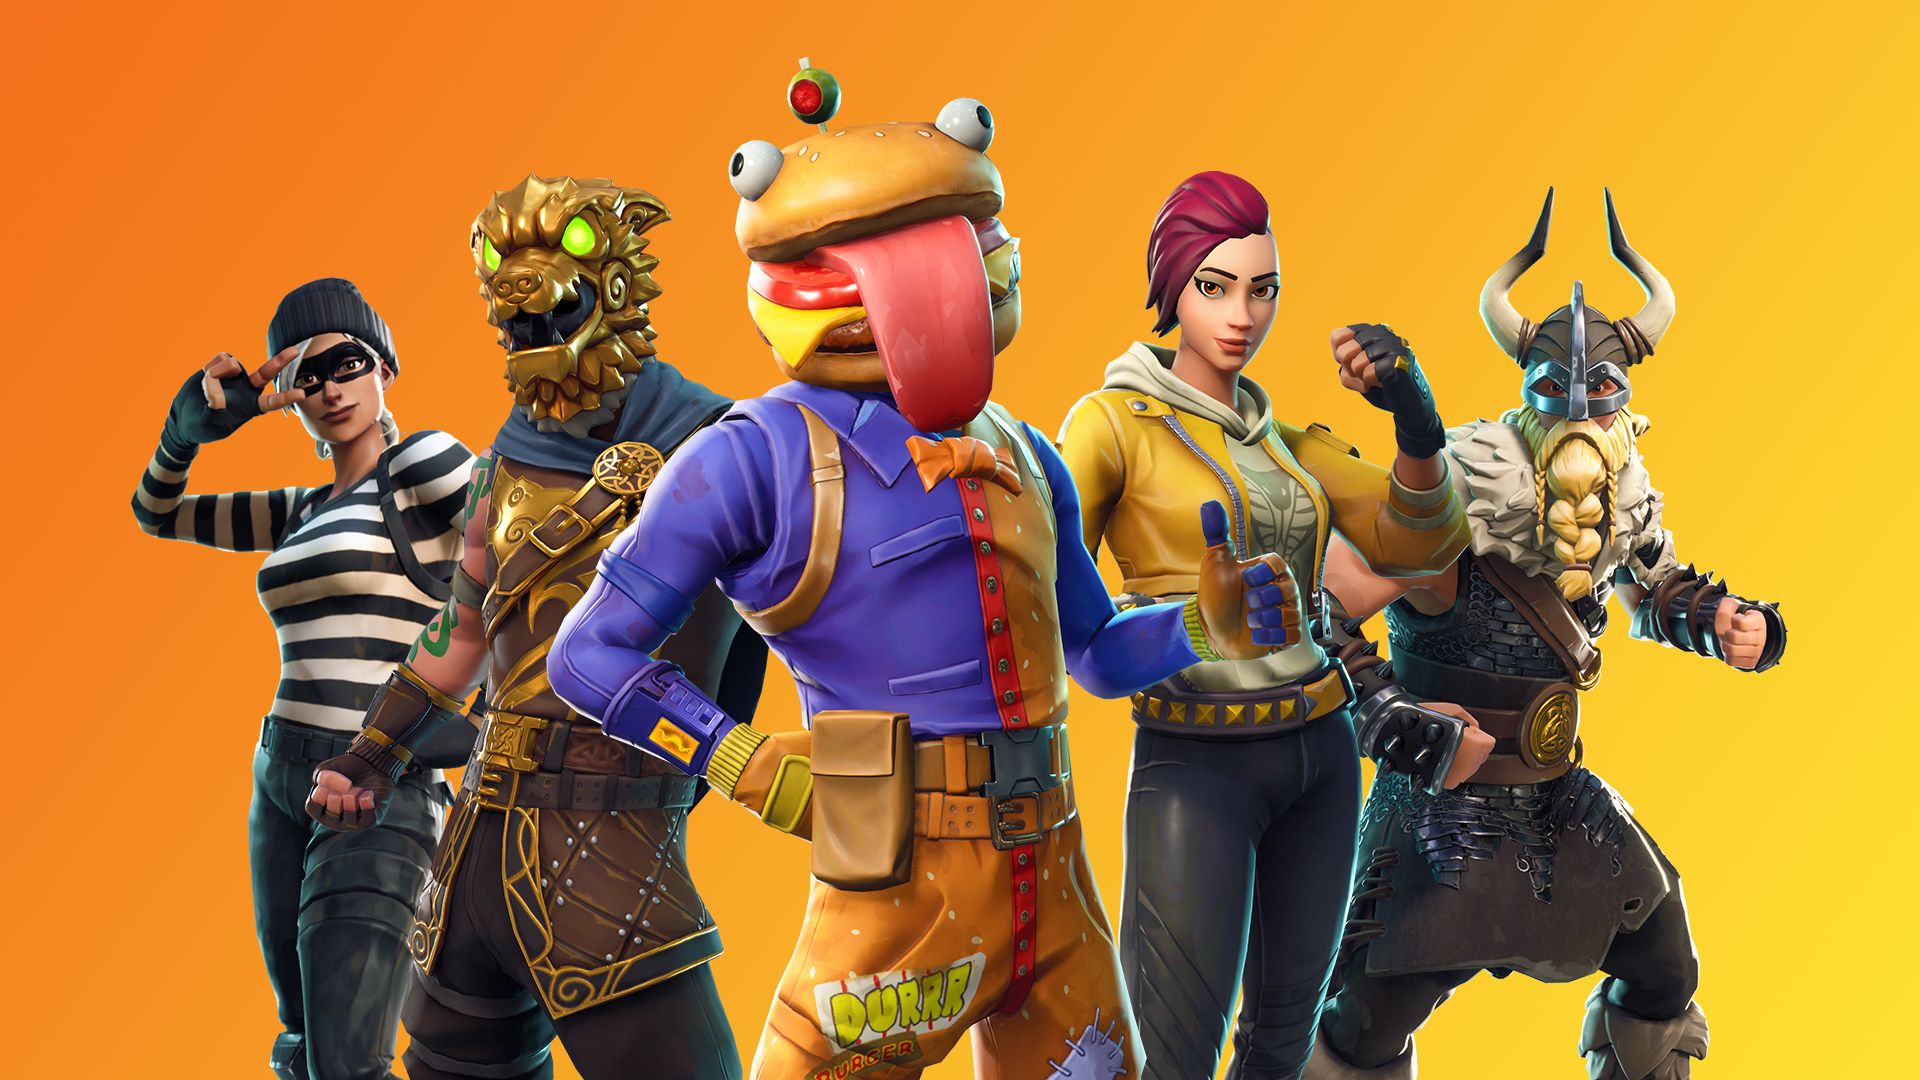 Patch Notes for v7.10 - 14 Days of Fortnite, Bug Fixes, and more